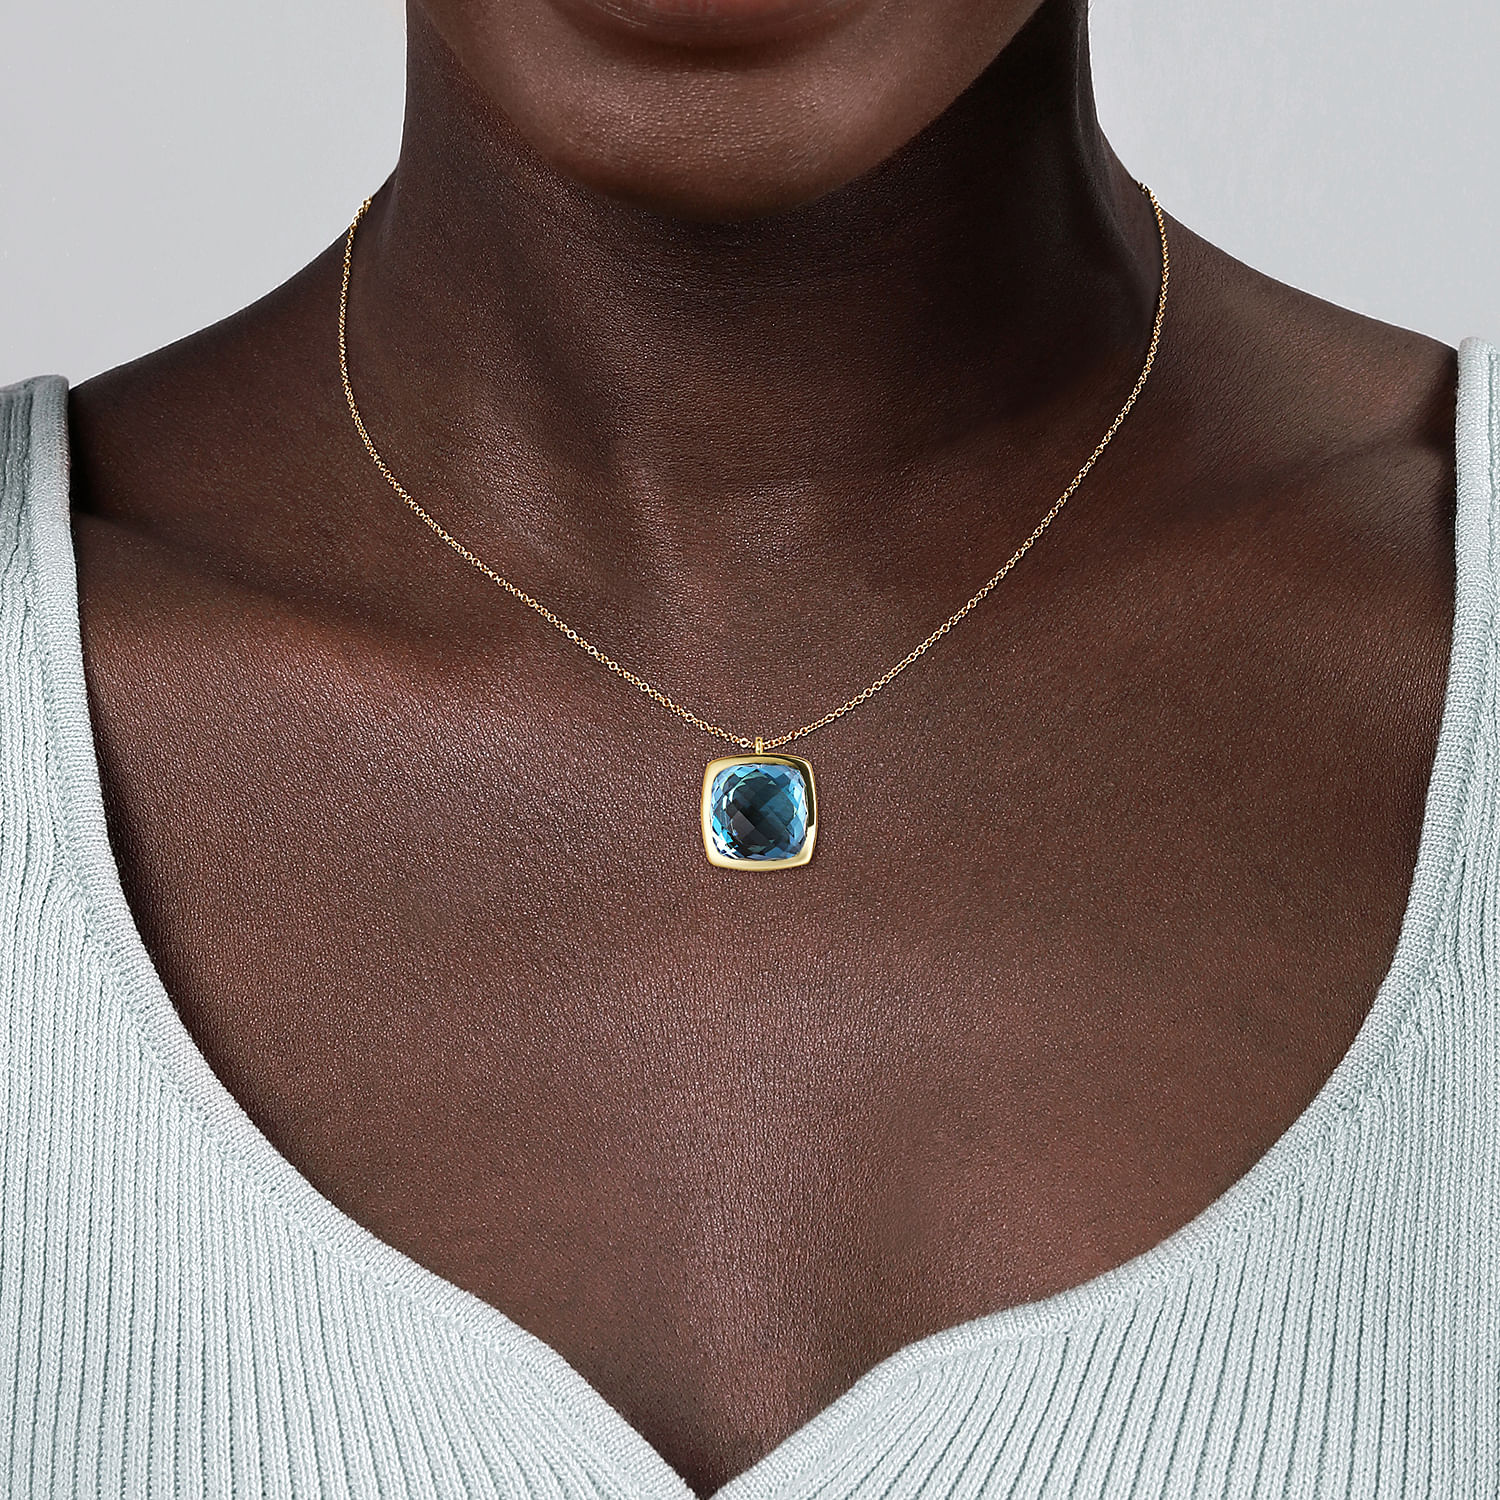 14K Yellow Gold Cushion Cut Blue Topaz Necklace With Flower Pattern J-Back and Bezel Setting